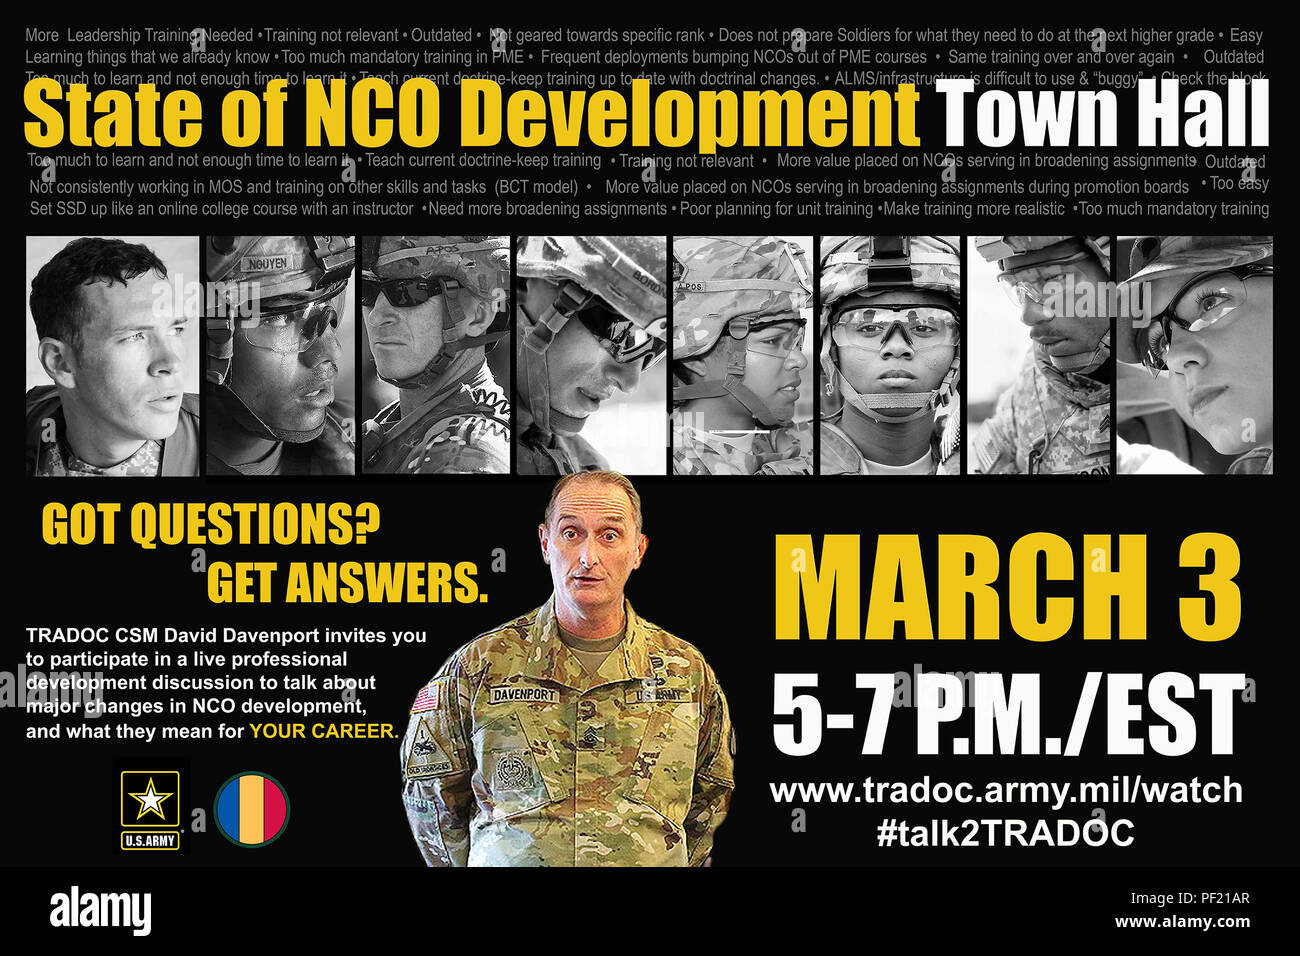 The U.S. Army Training and Doctrine Command will host a State of NCO Development town hall that will be streamed live via a webcast March 3, 5 to 7 p.m. To watch the webcast online, visit www.tradoc.army.mil/watch. (U.S. Army graphic) Stock Photo